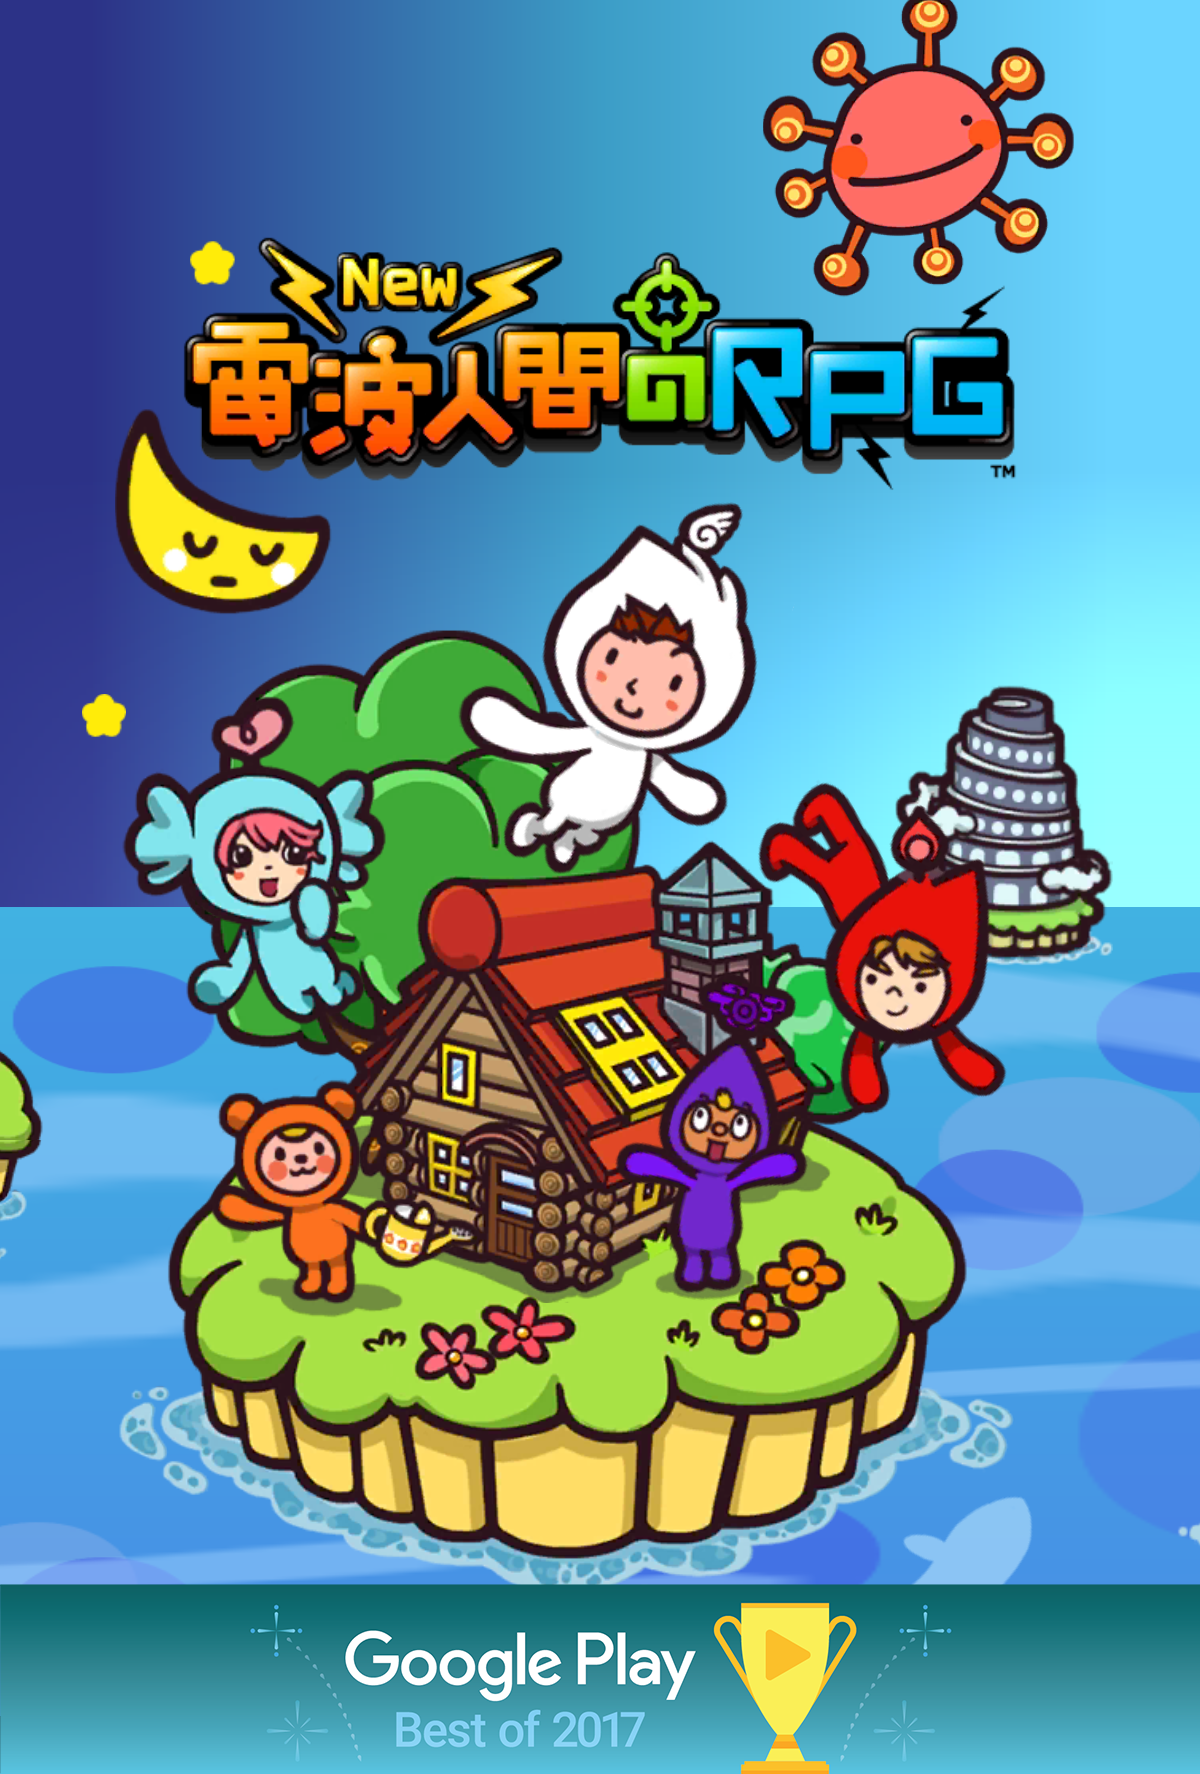 New 電波人間のrpg Android Download Taptap